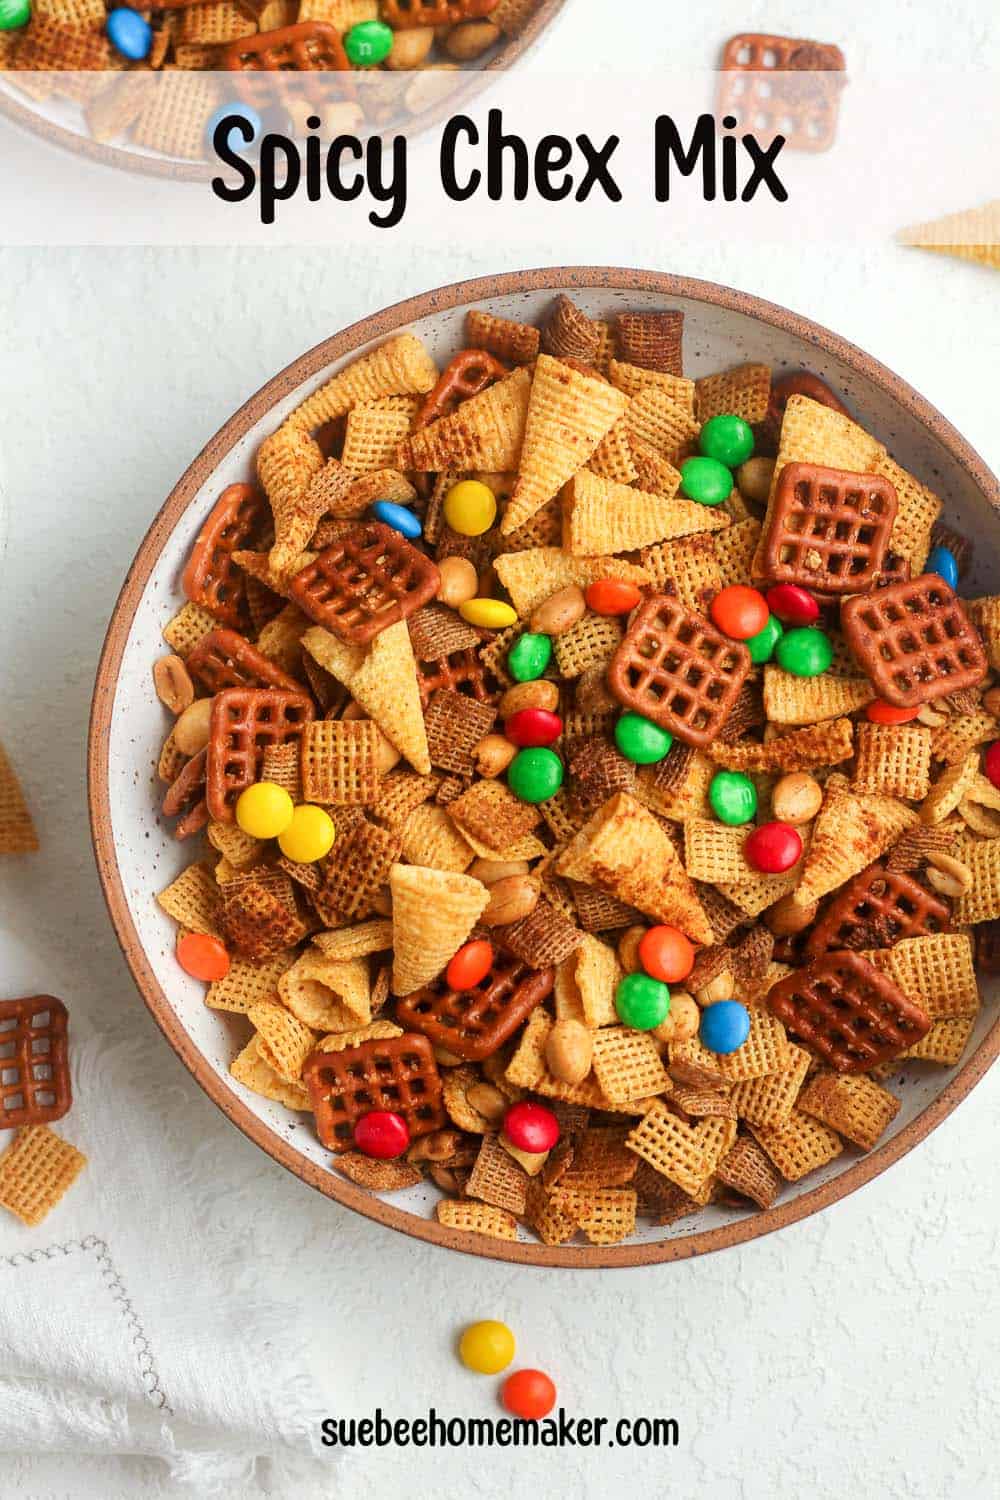 A bowl of the spicy chex mix on a white surface.